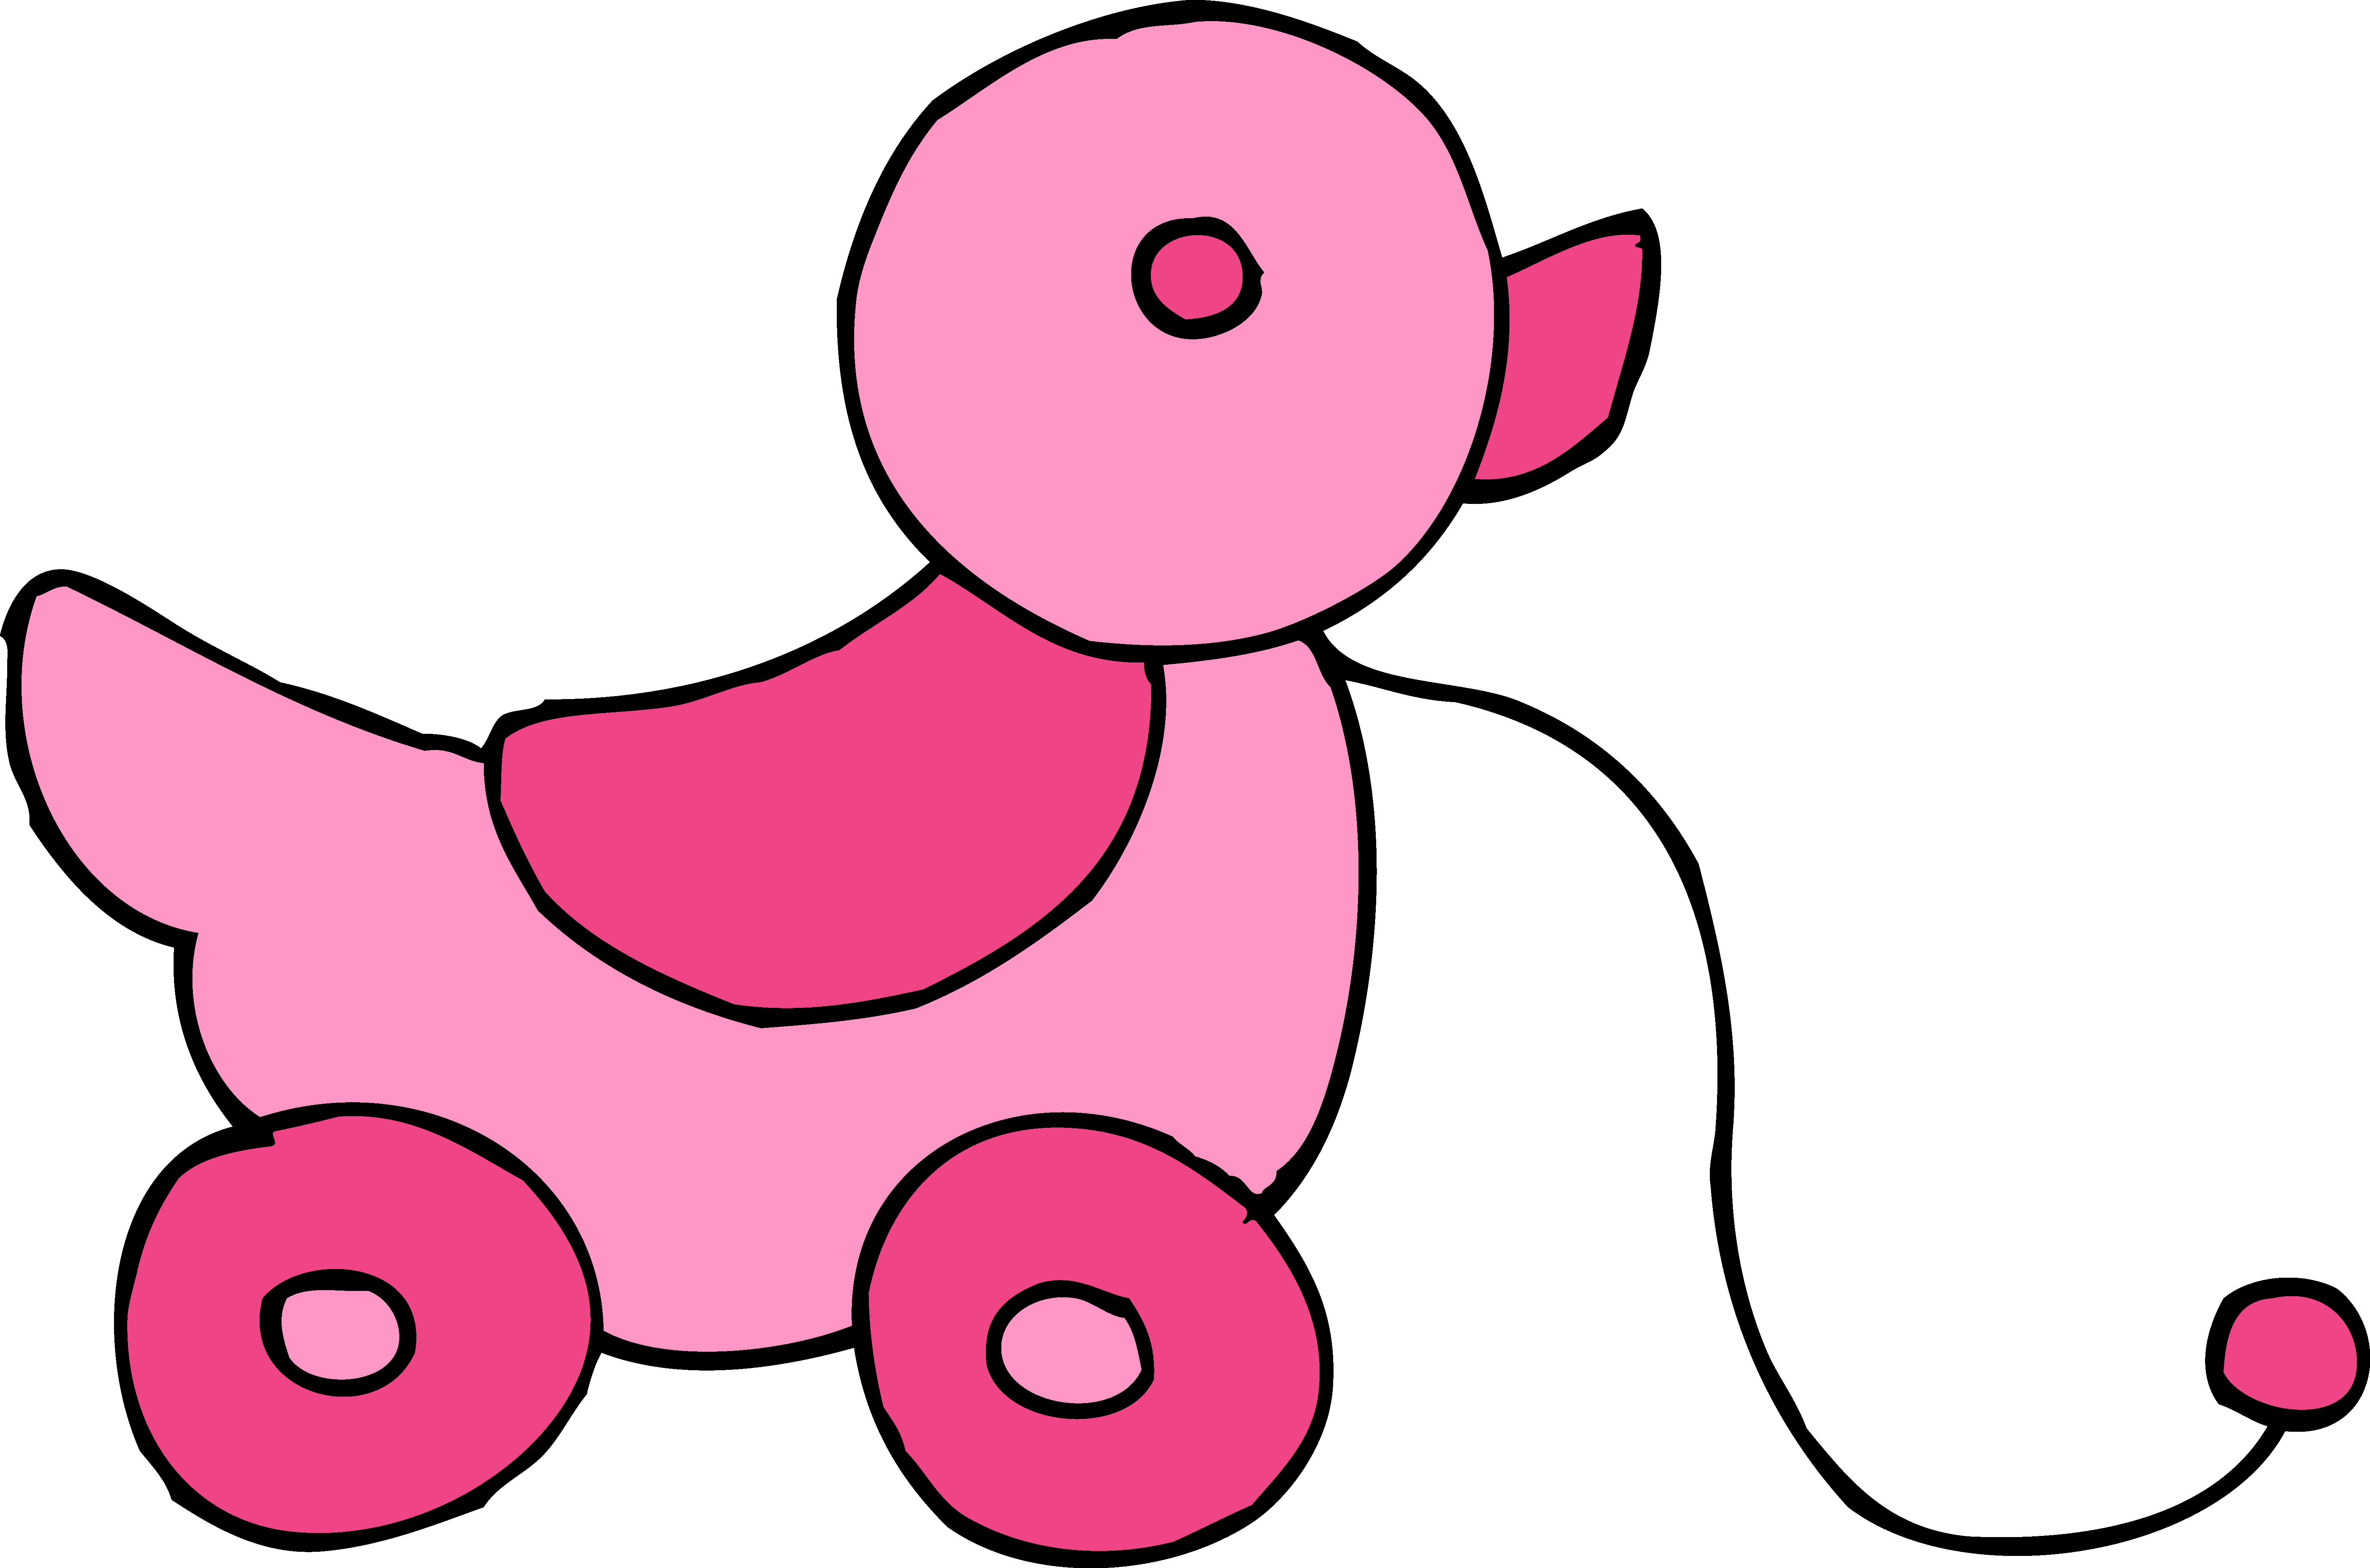 Toy computer clipart